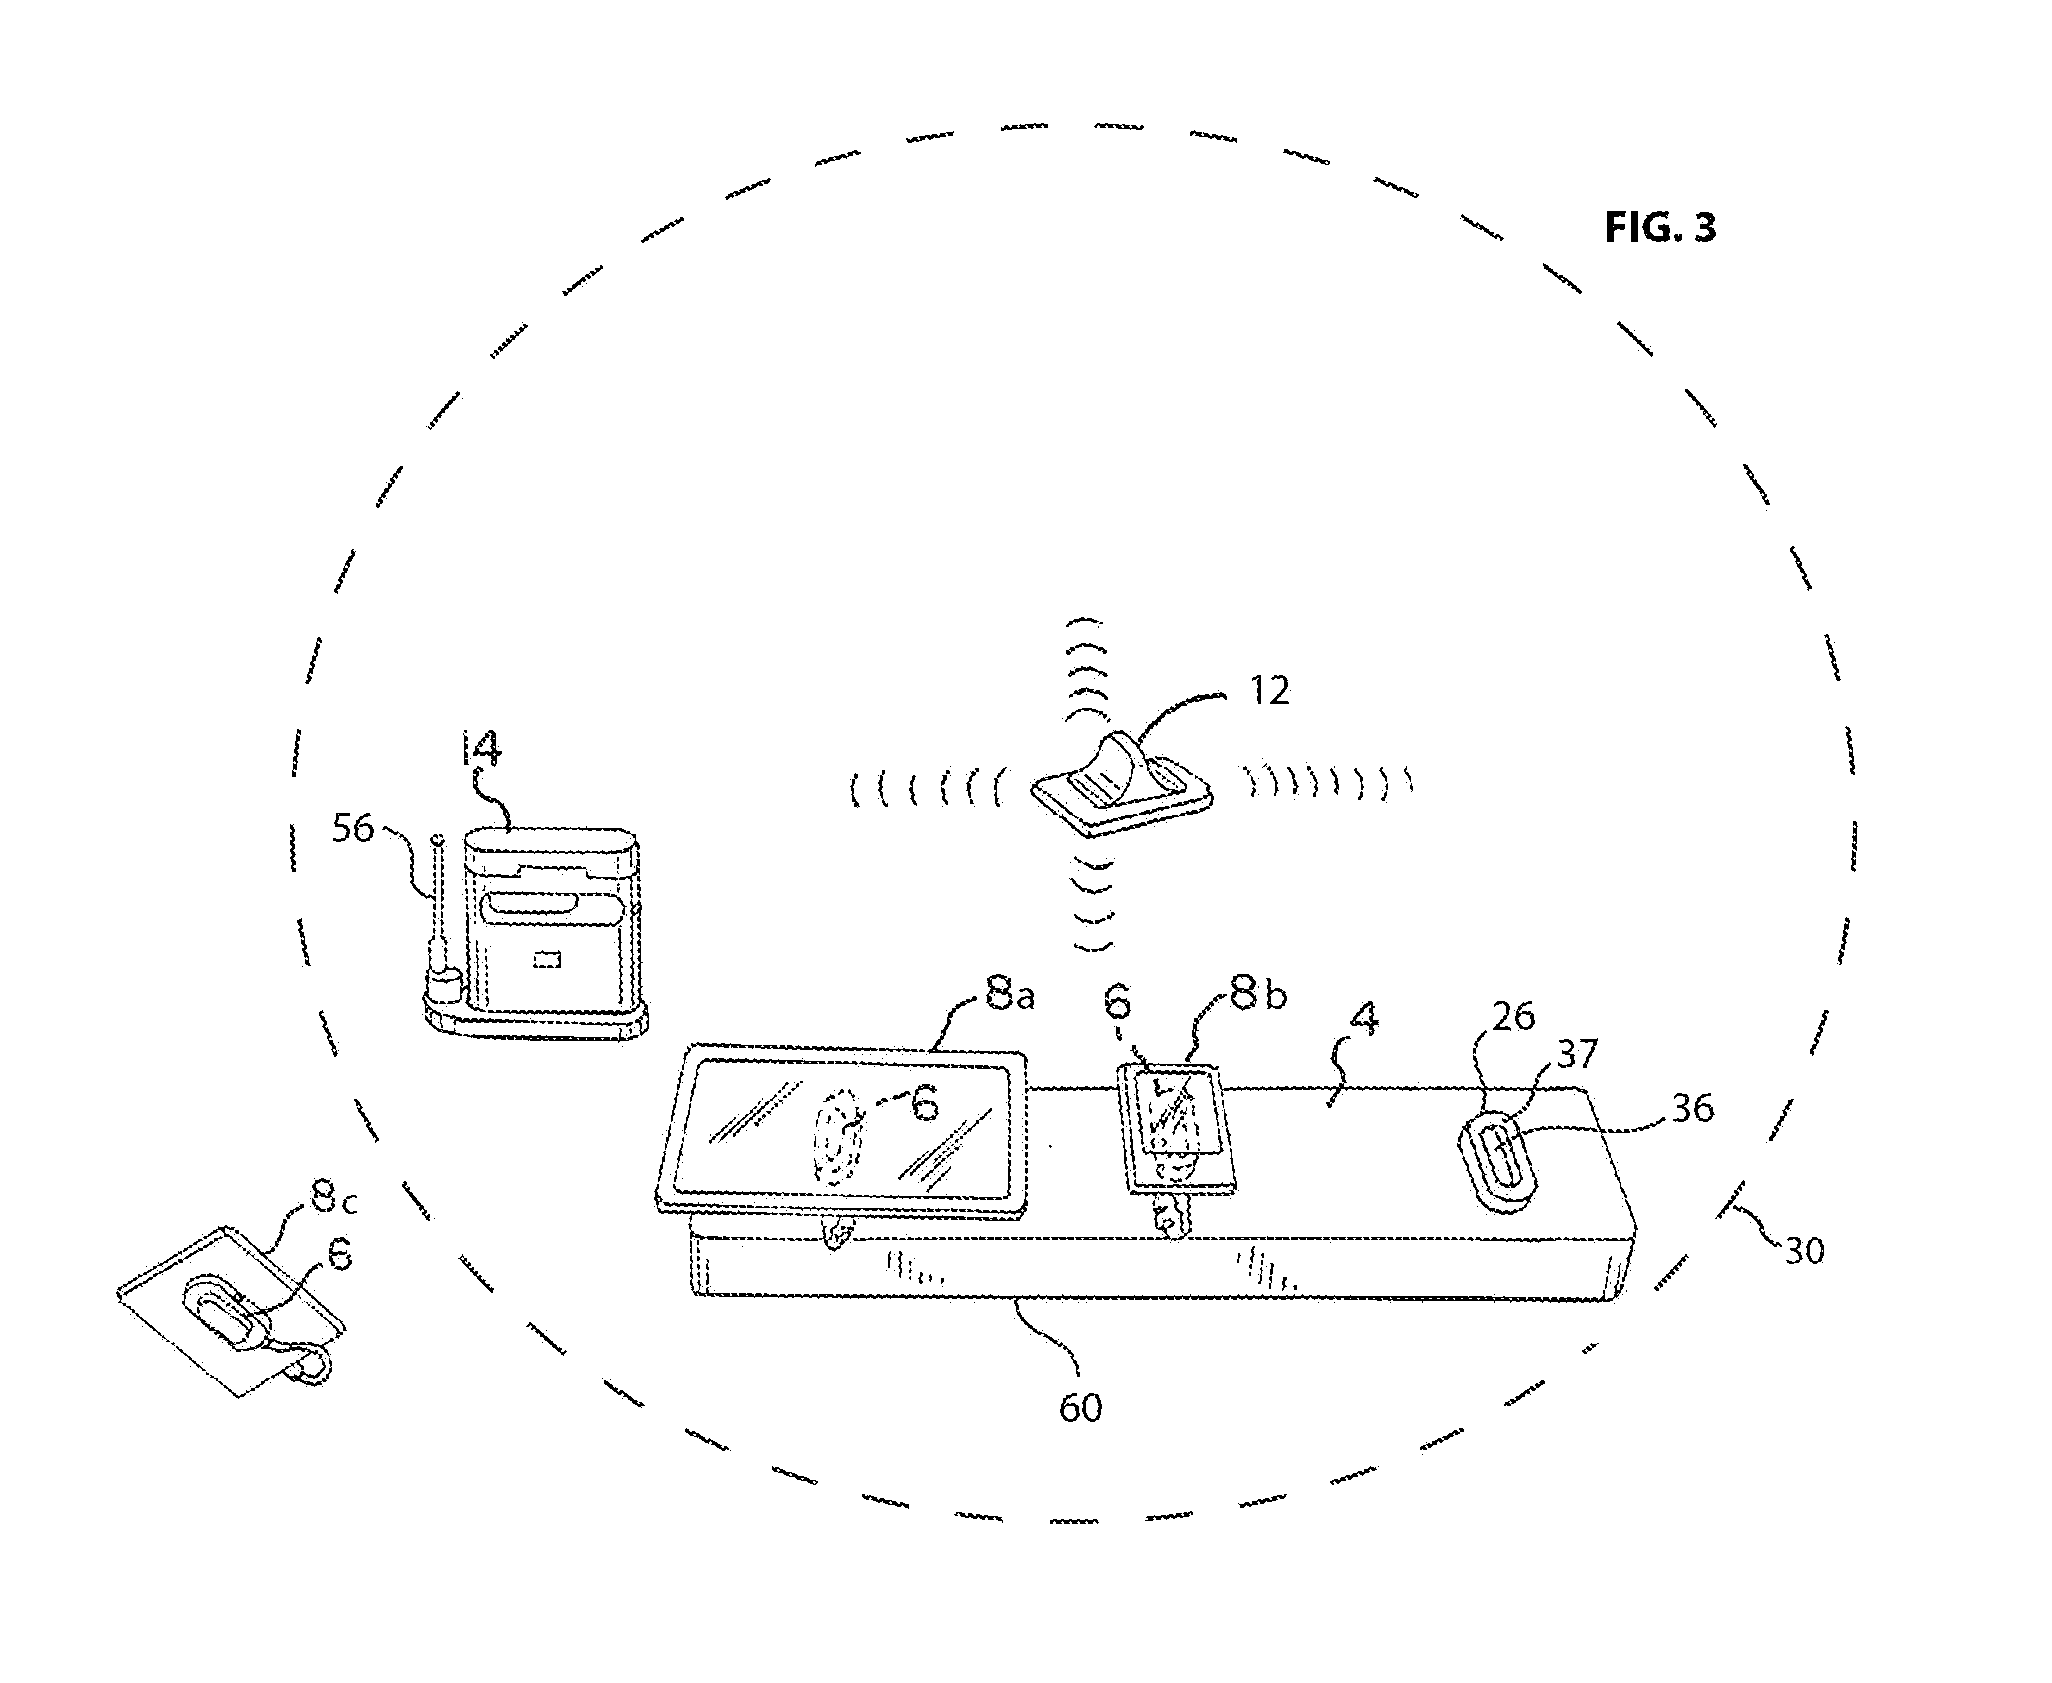 Apparatus, system and method for monitoring a device within a zone